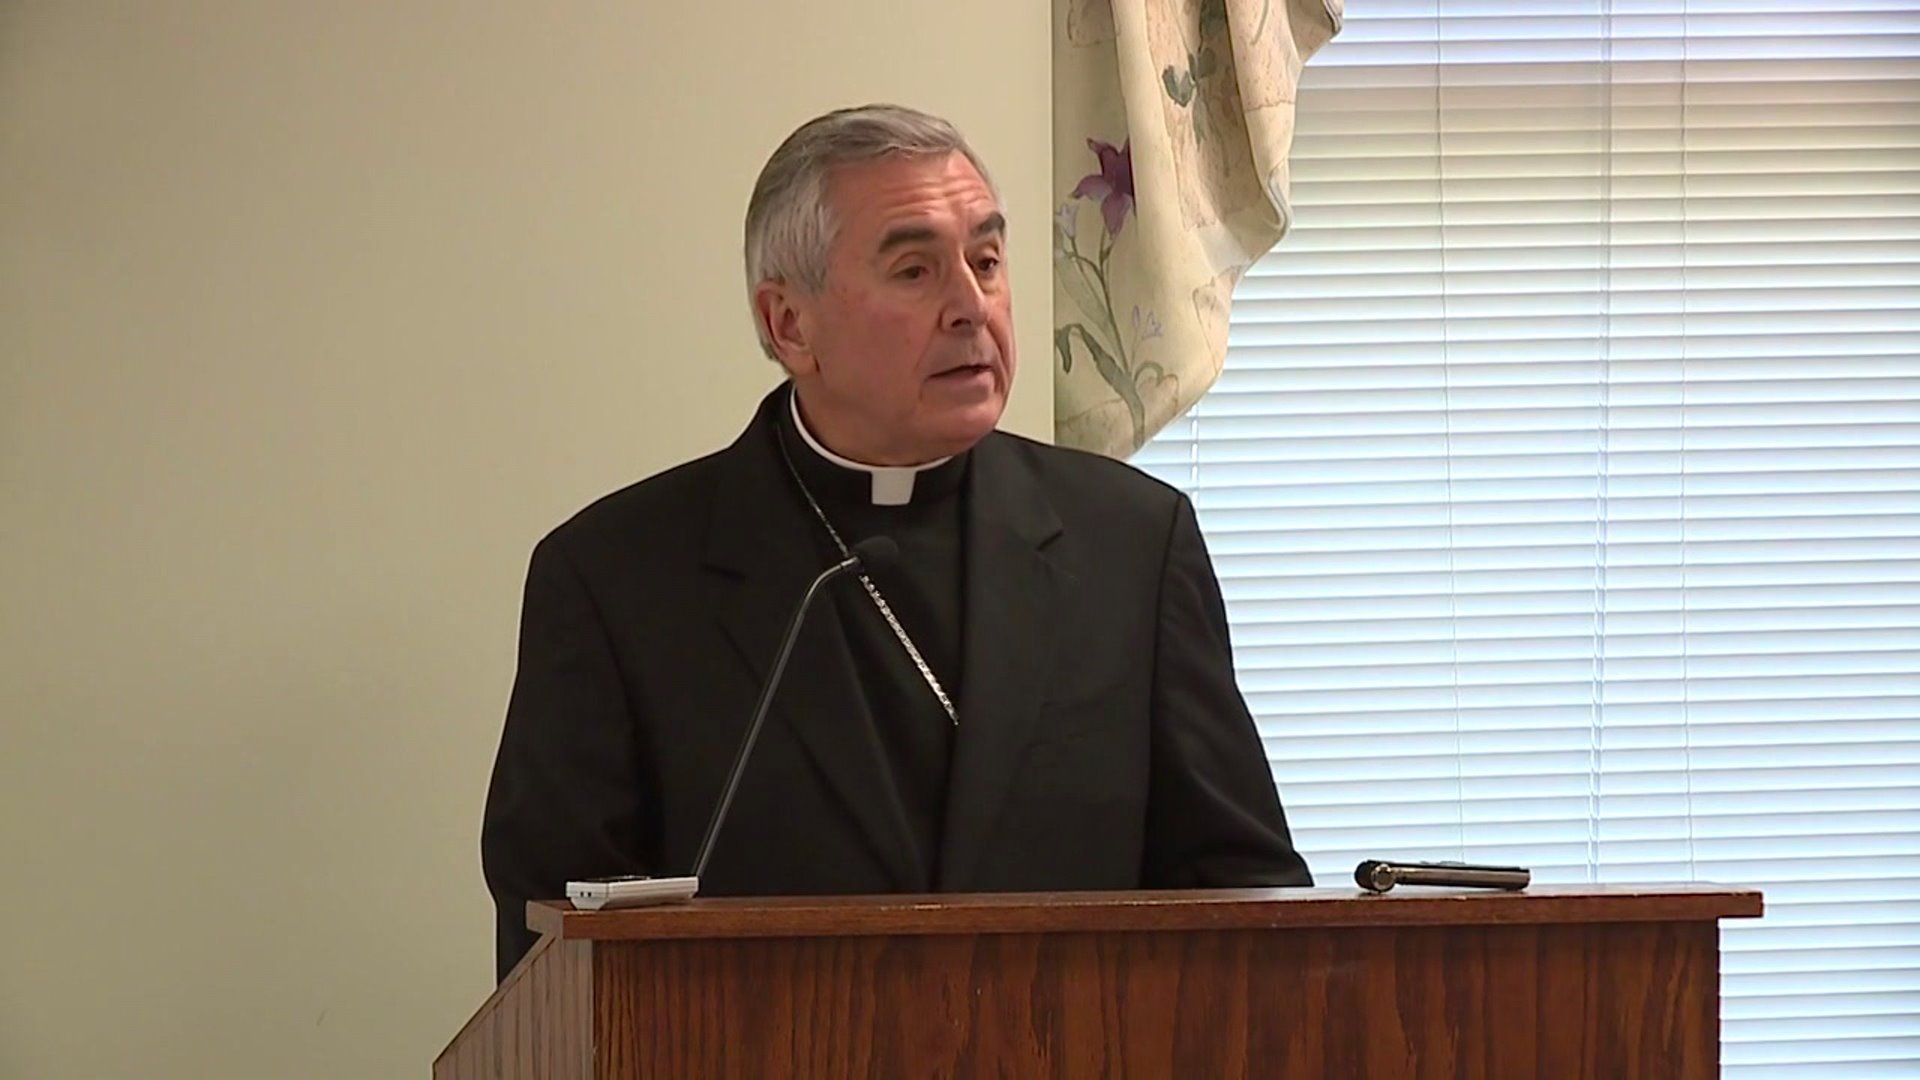 Bishop Coming to Elysburg for Listening Session